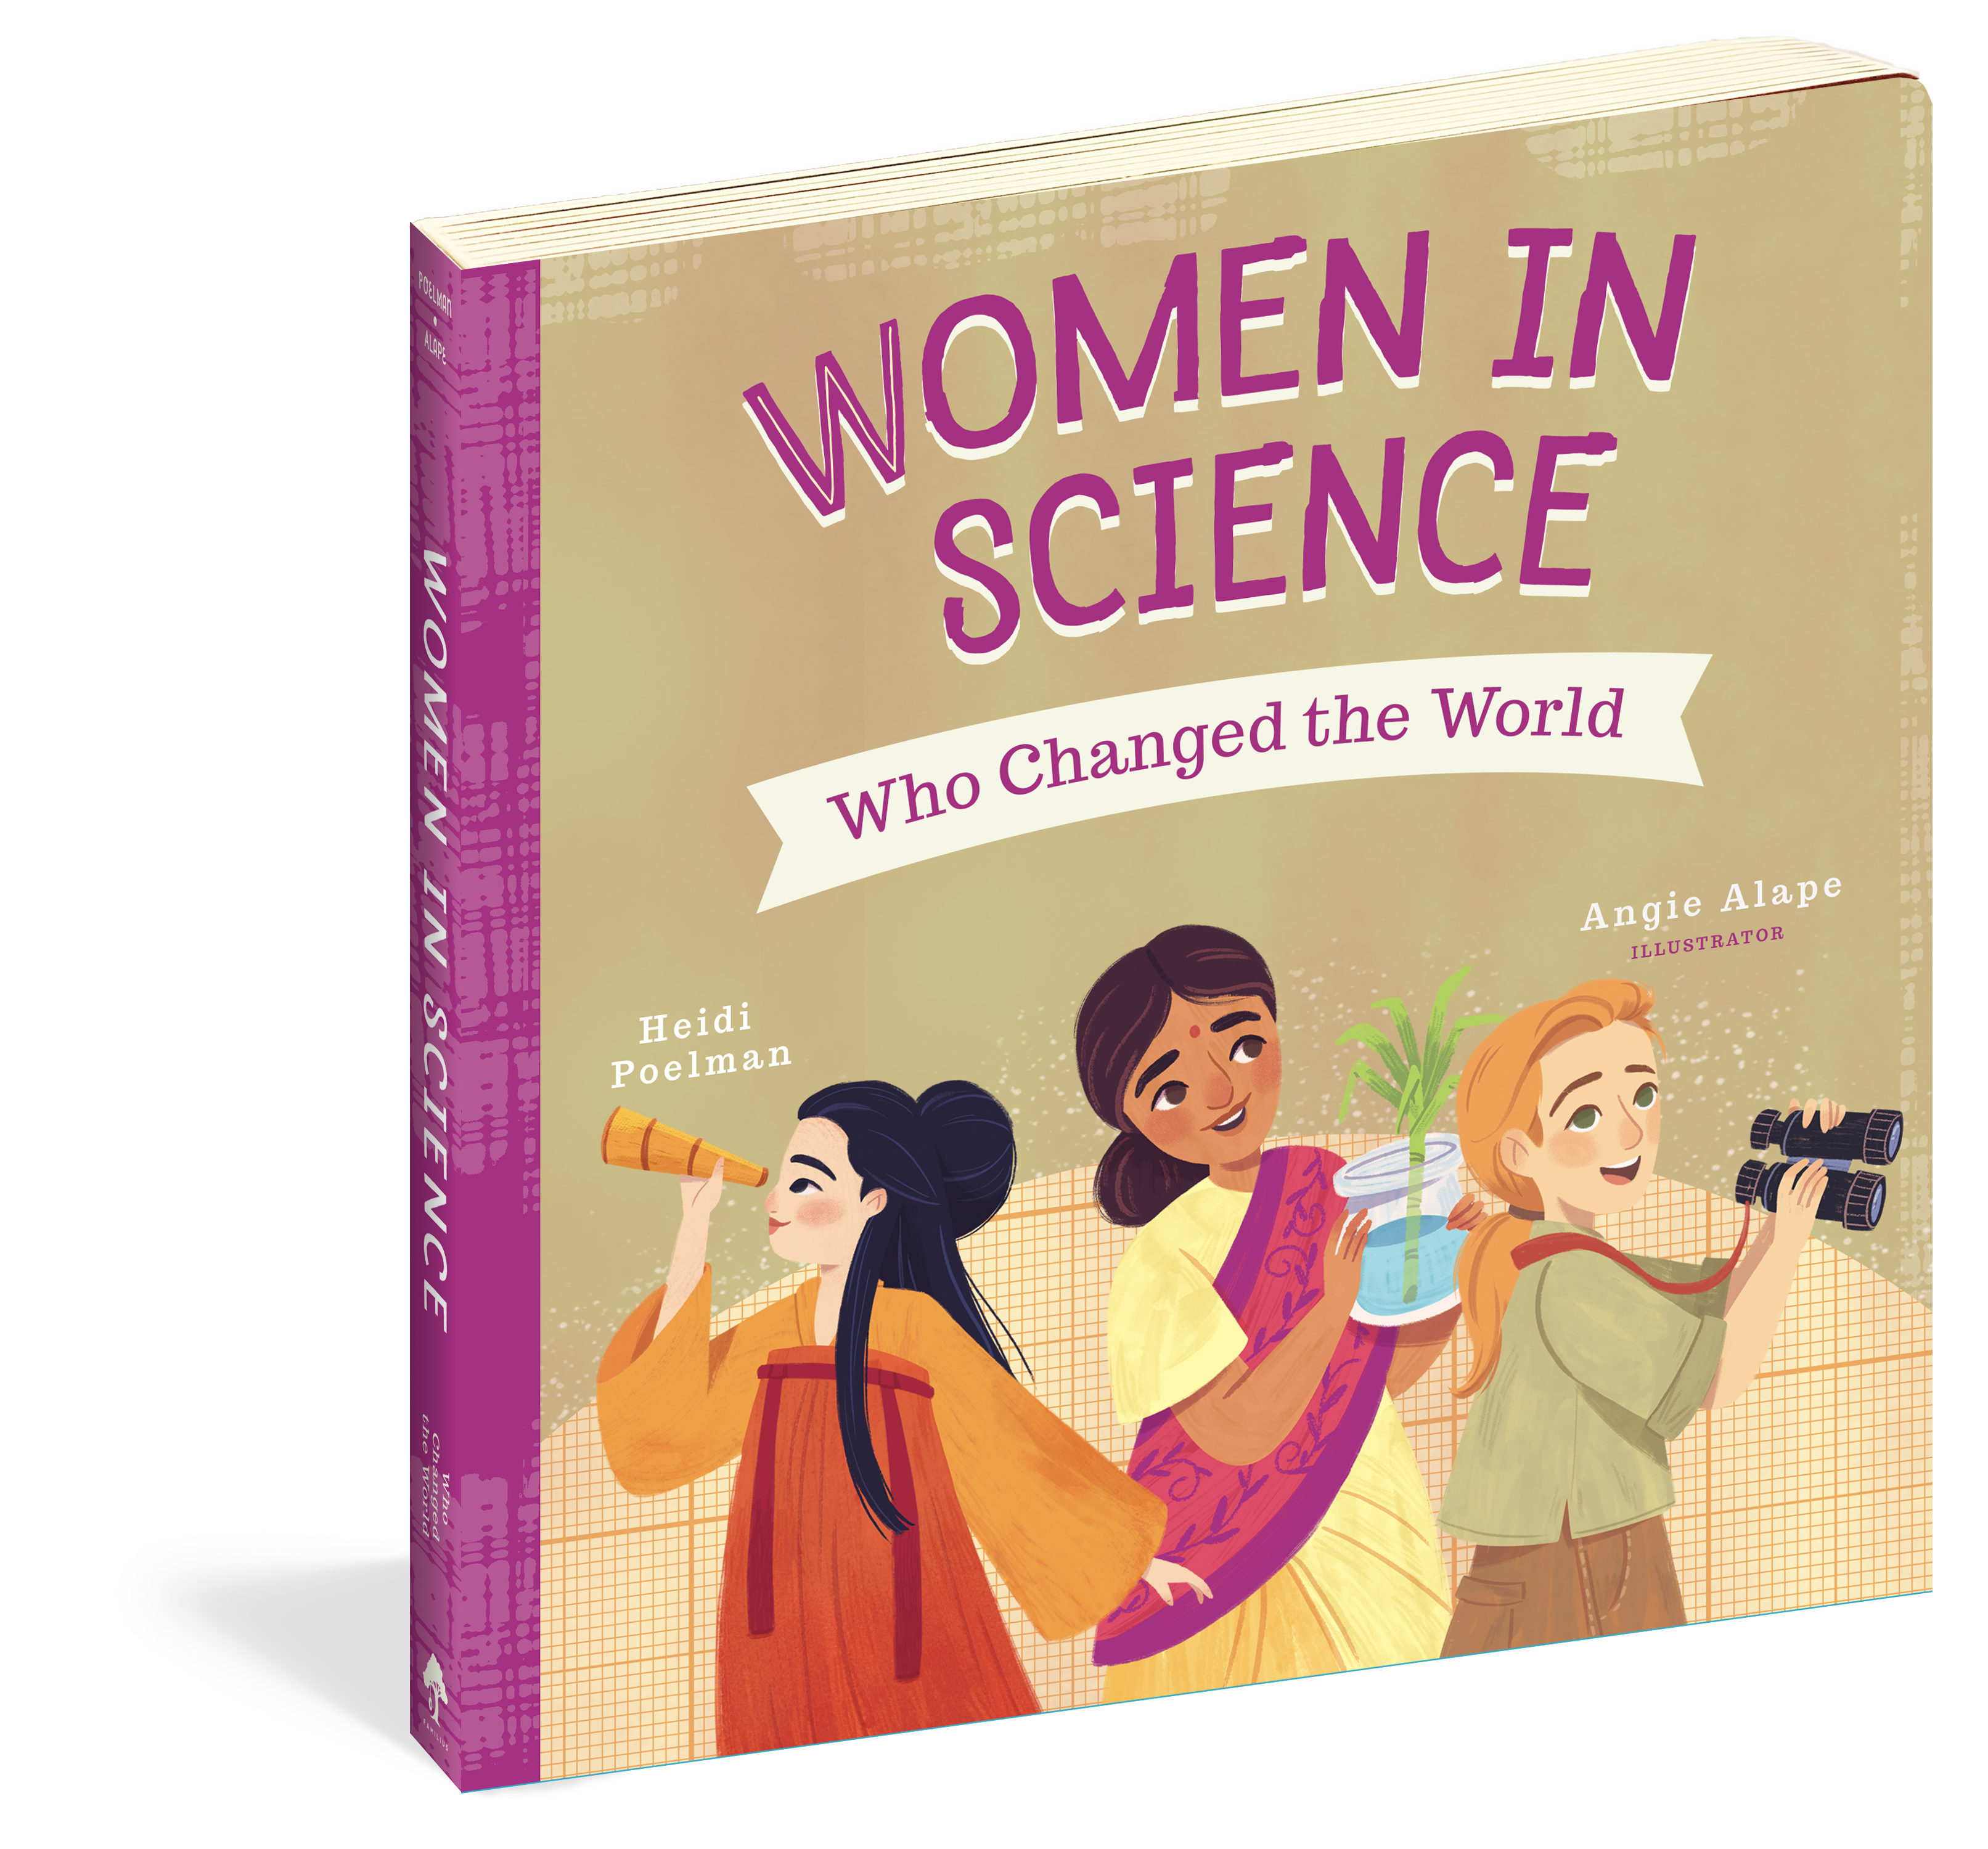 The cover of the board book Women in Science Who Changed the World.